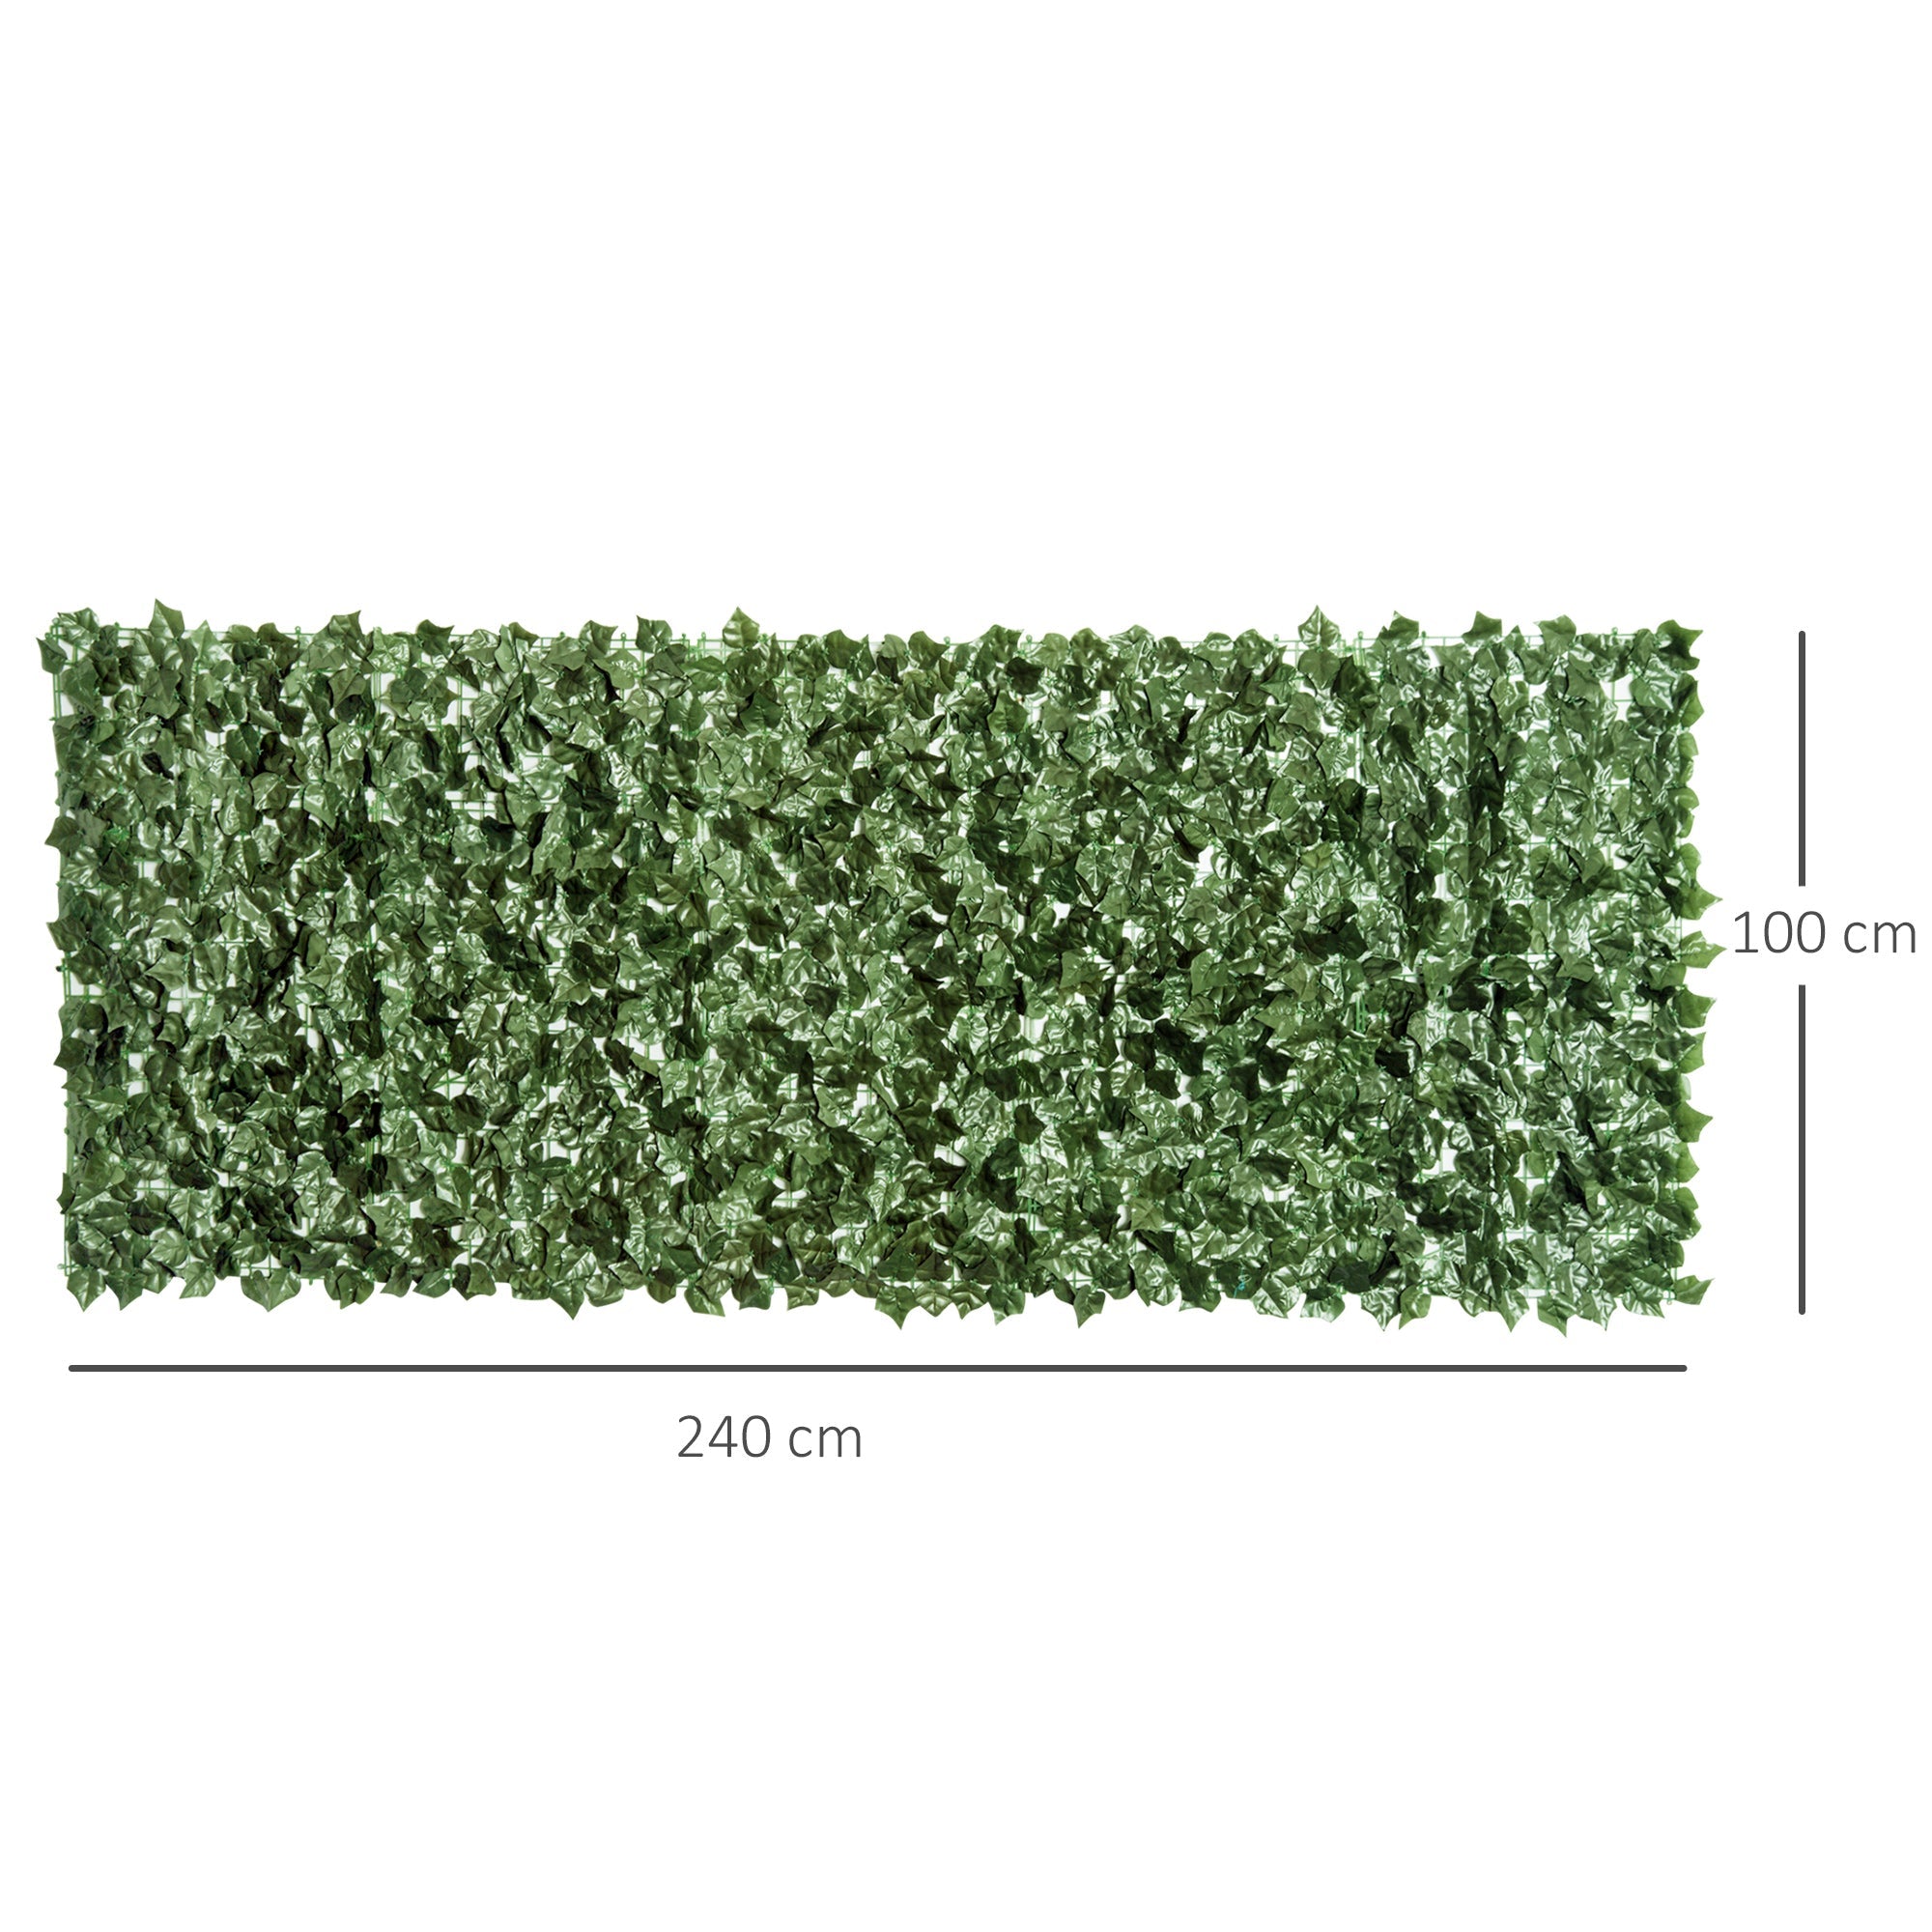 4-Piece Artificial Leaf Hedge Screen Privacy Fence Panel for Garden Outdoor Indoor Decor, Dark Green, 2.4M x 1M-2